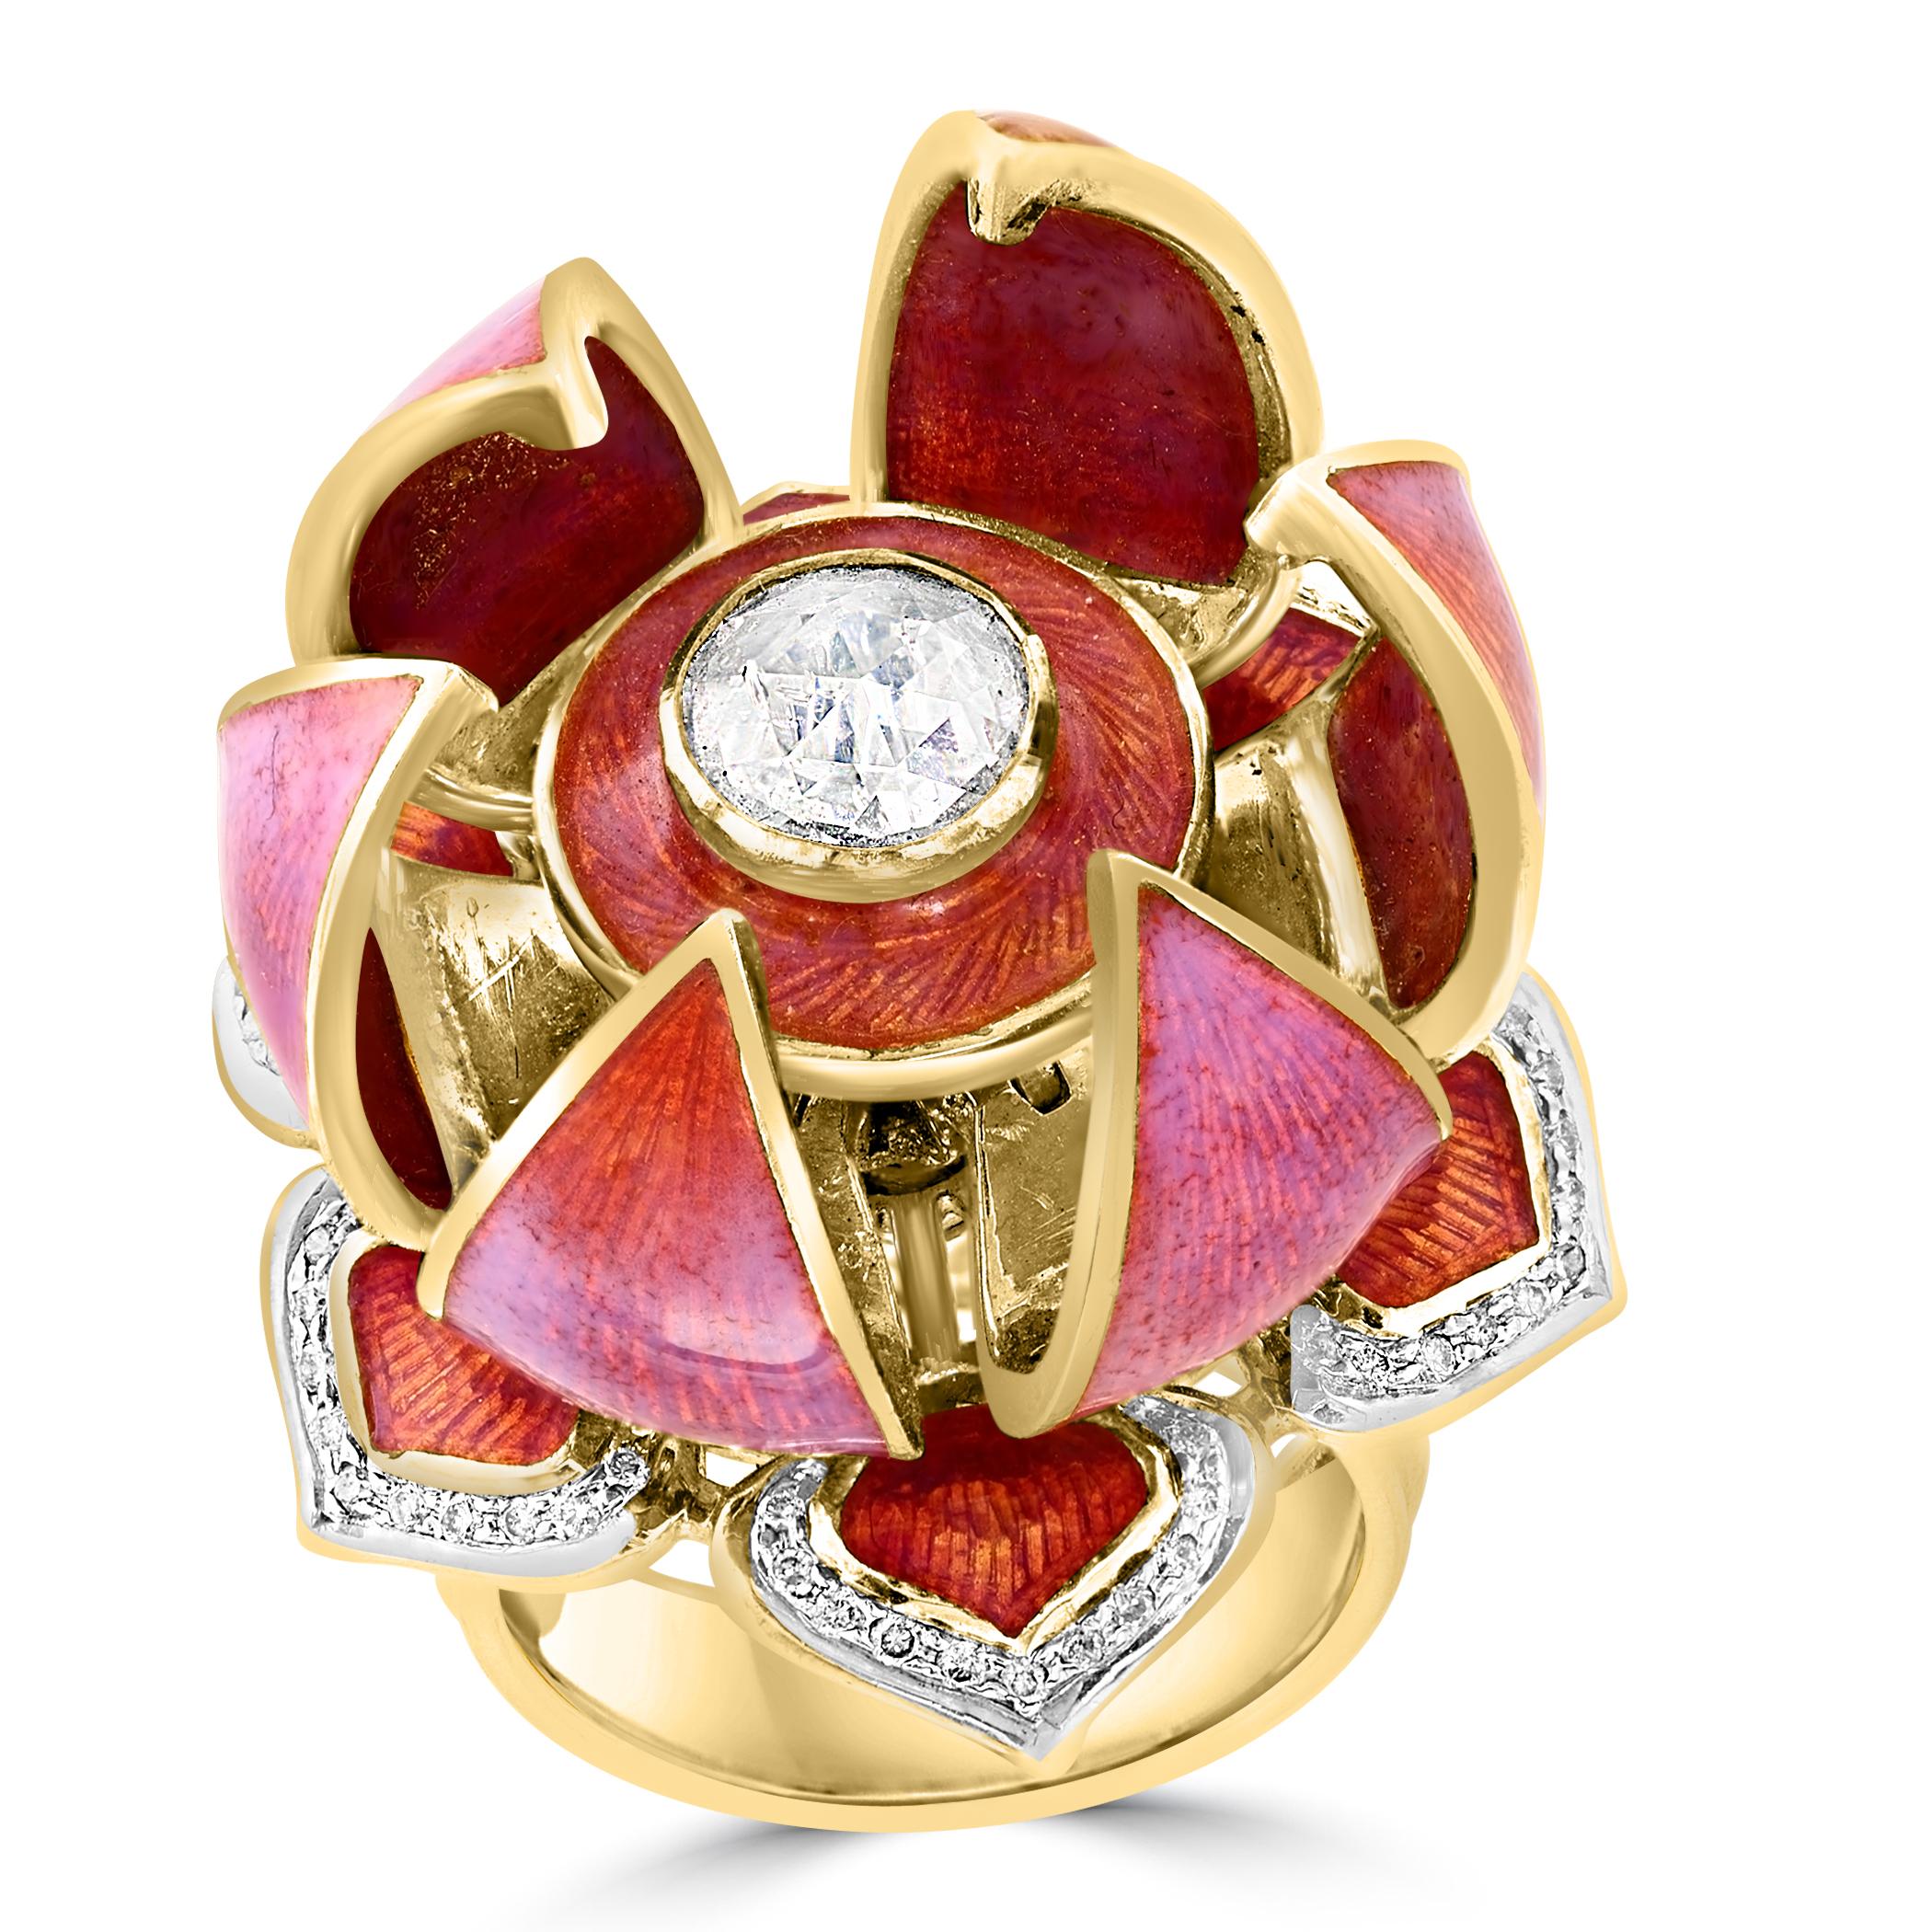 Gorgeous Lotus Flower Ring featuring a solitaire Diamond and Enamel, size 6.5. This unique ring mimics the opening of a lotus bud into a fully bloomed flower, crafted with heavy 18 Karat yellow gold weighing 26gm. The enchanting pink/lilac enamel is